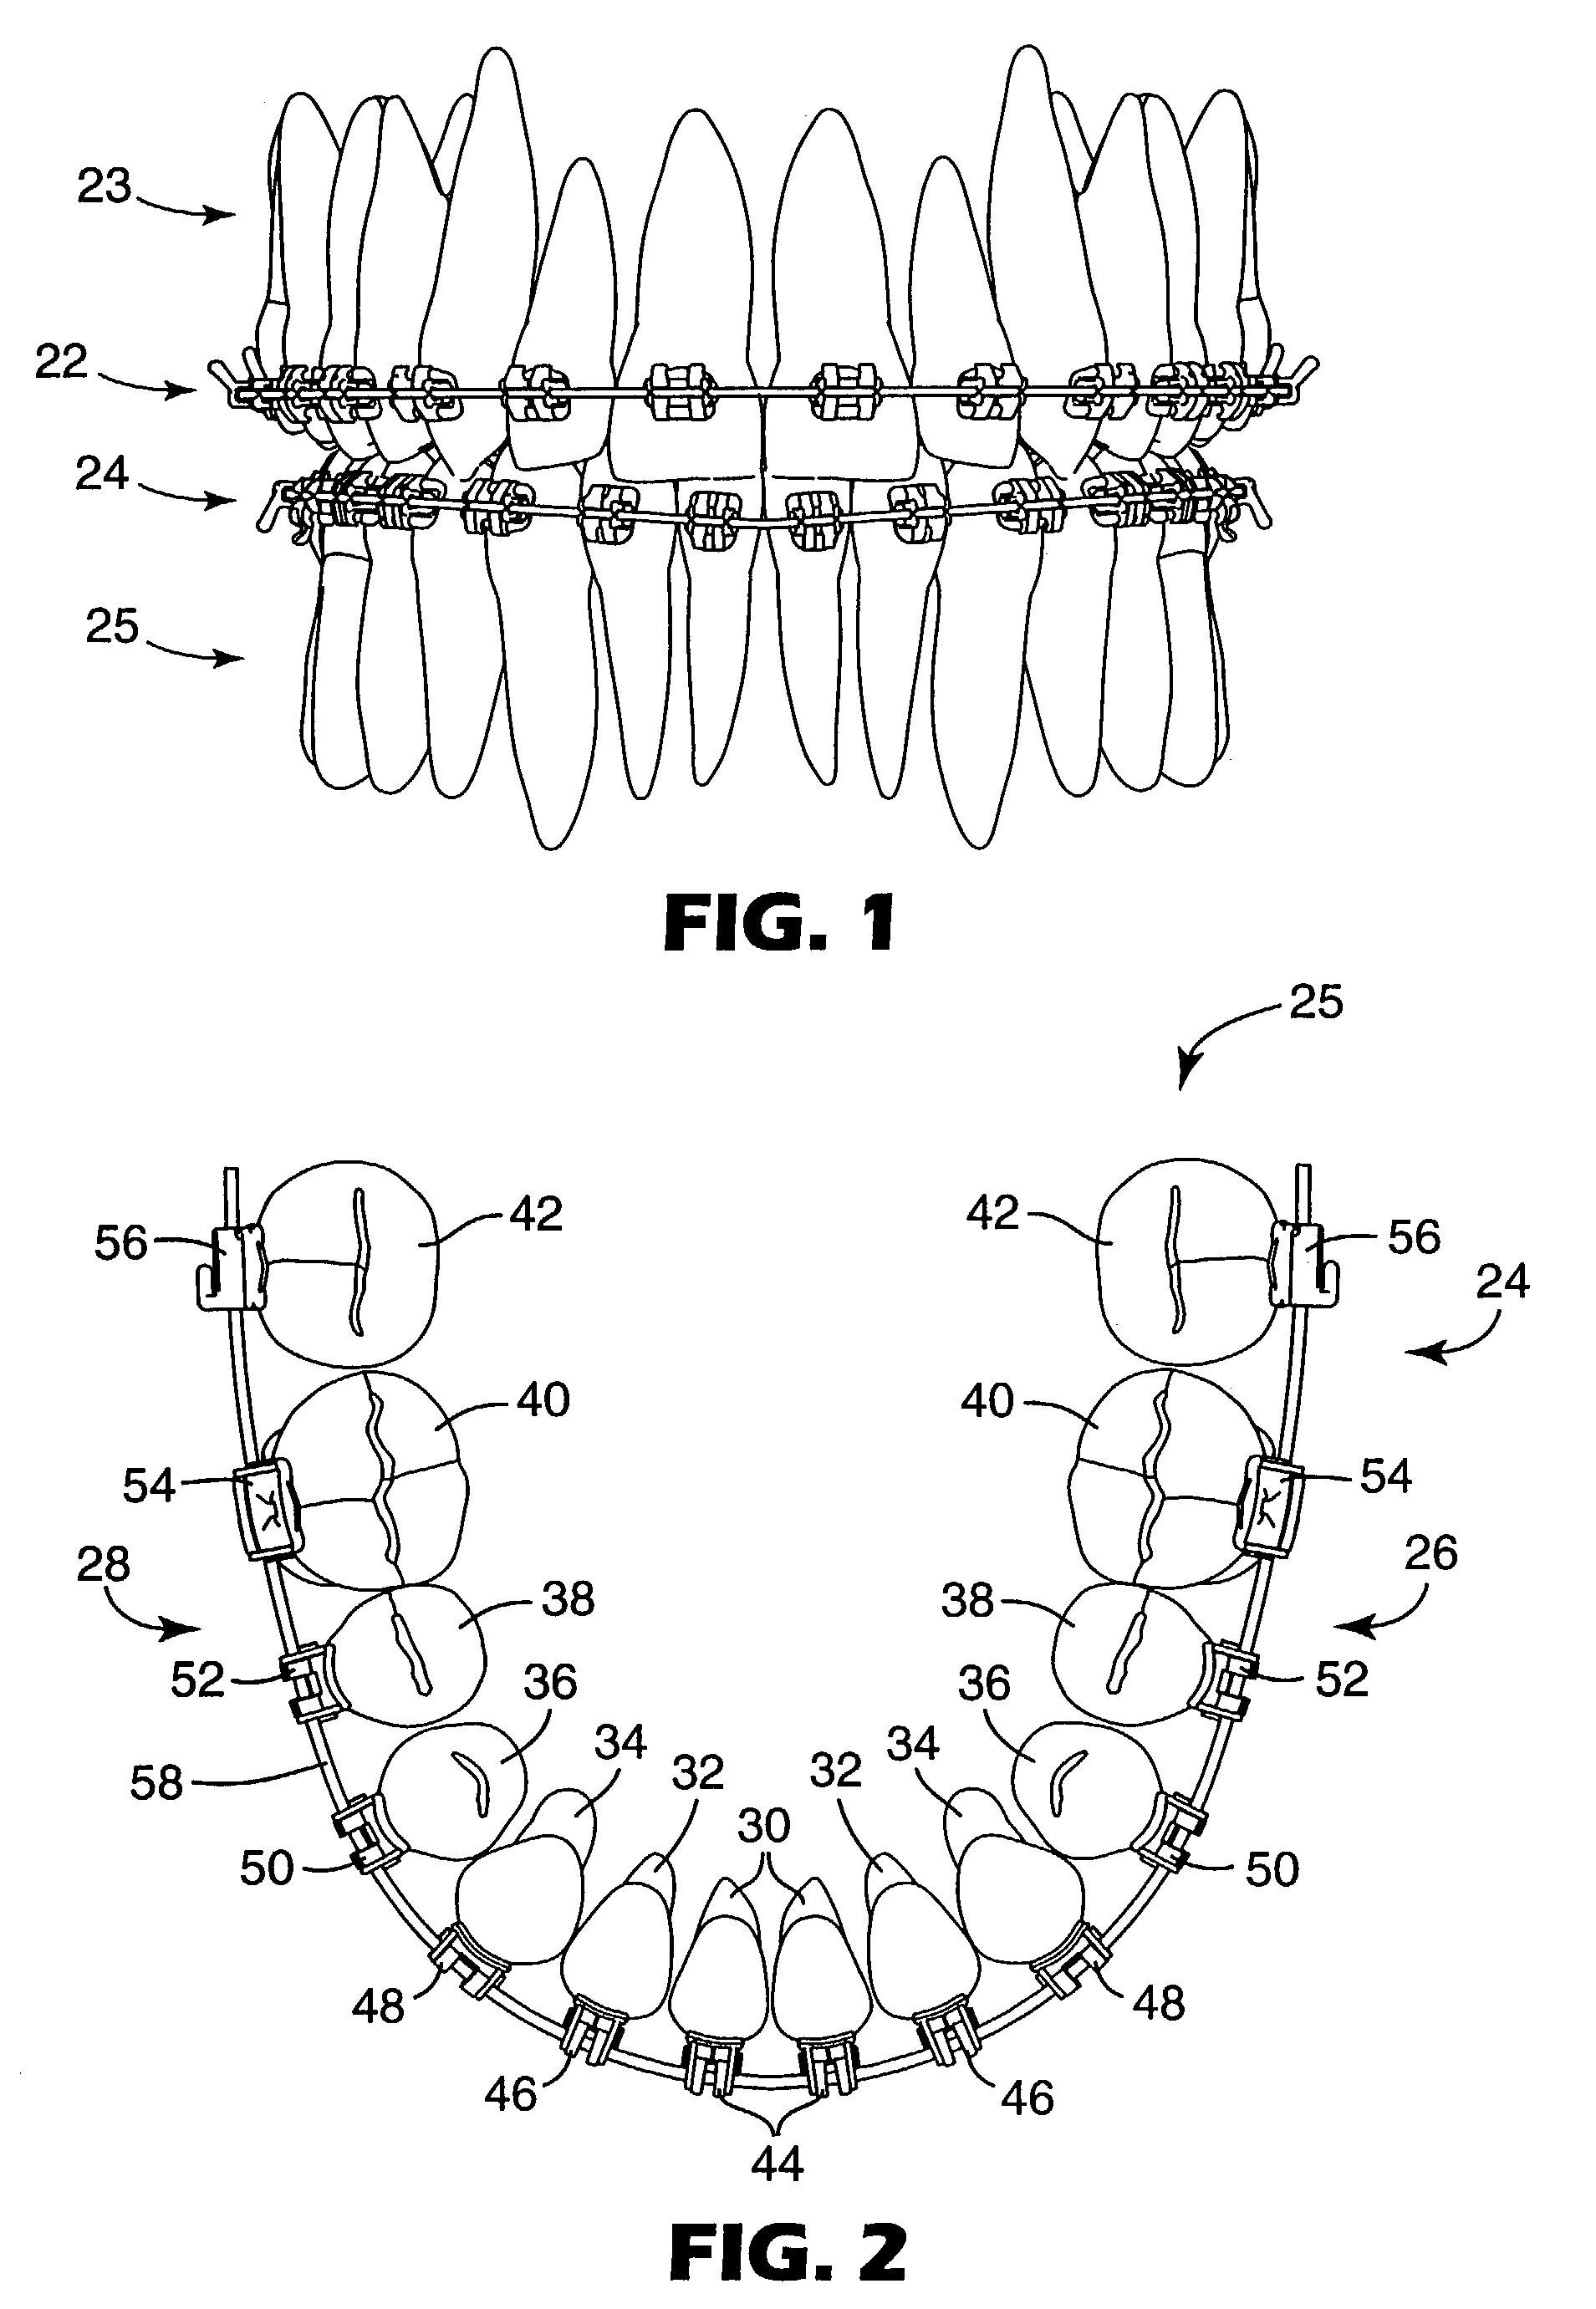 Orthodontic brace with self-releasing appliances